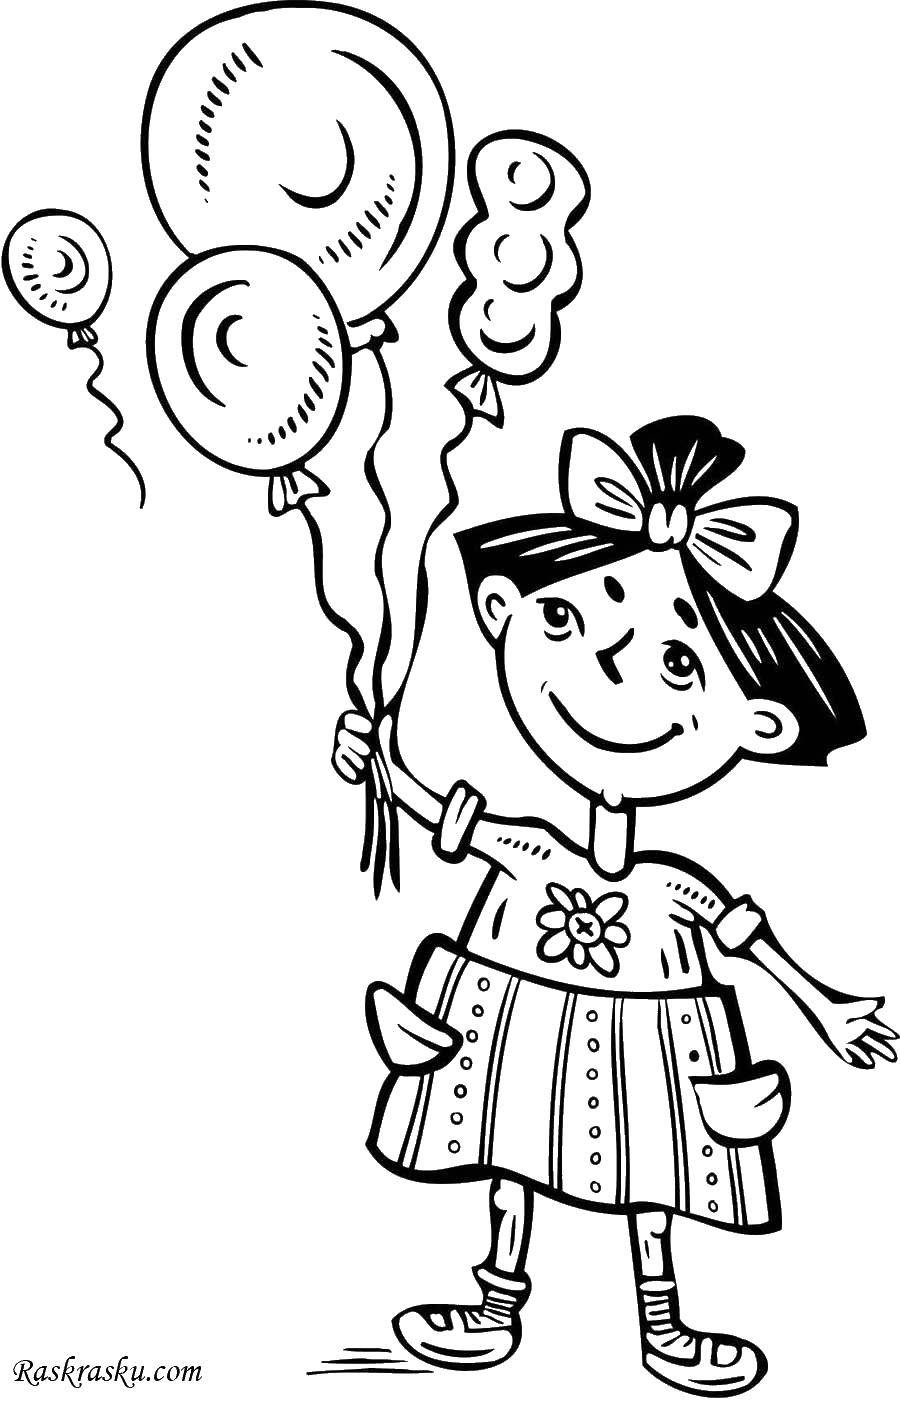 Coloring Girl with balloons. Category Girl. Tags:  girl , balloons, kids.